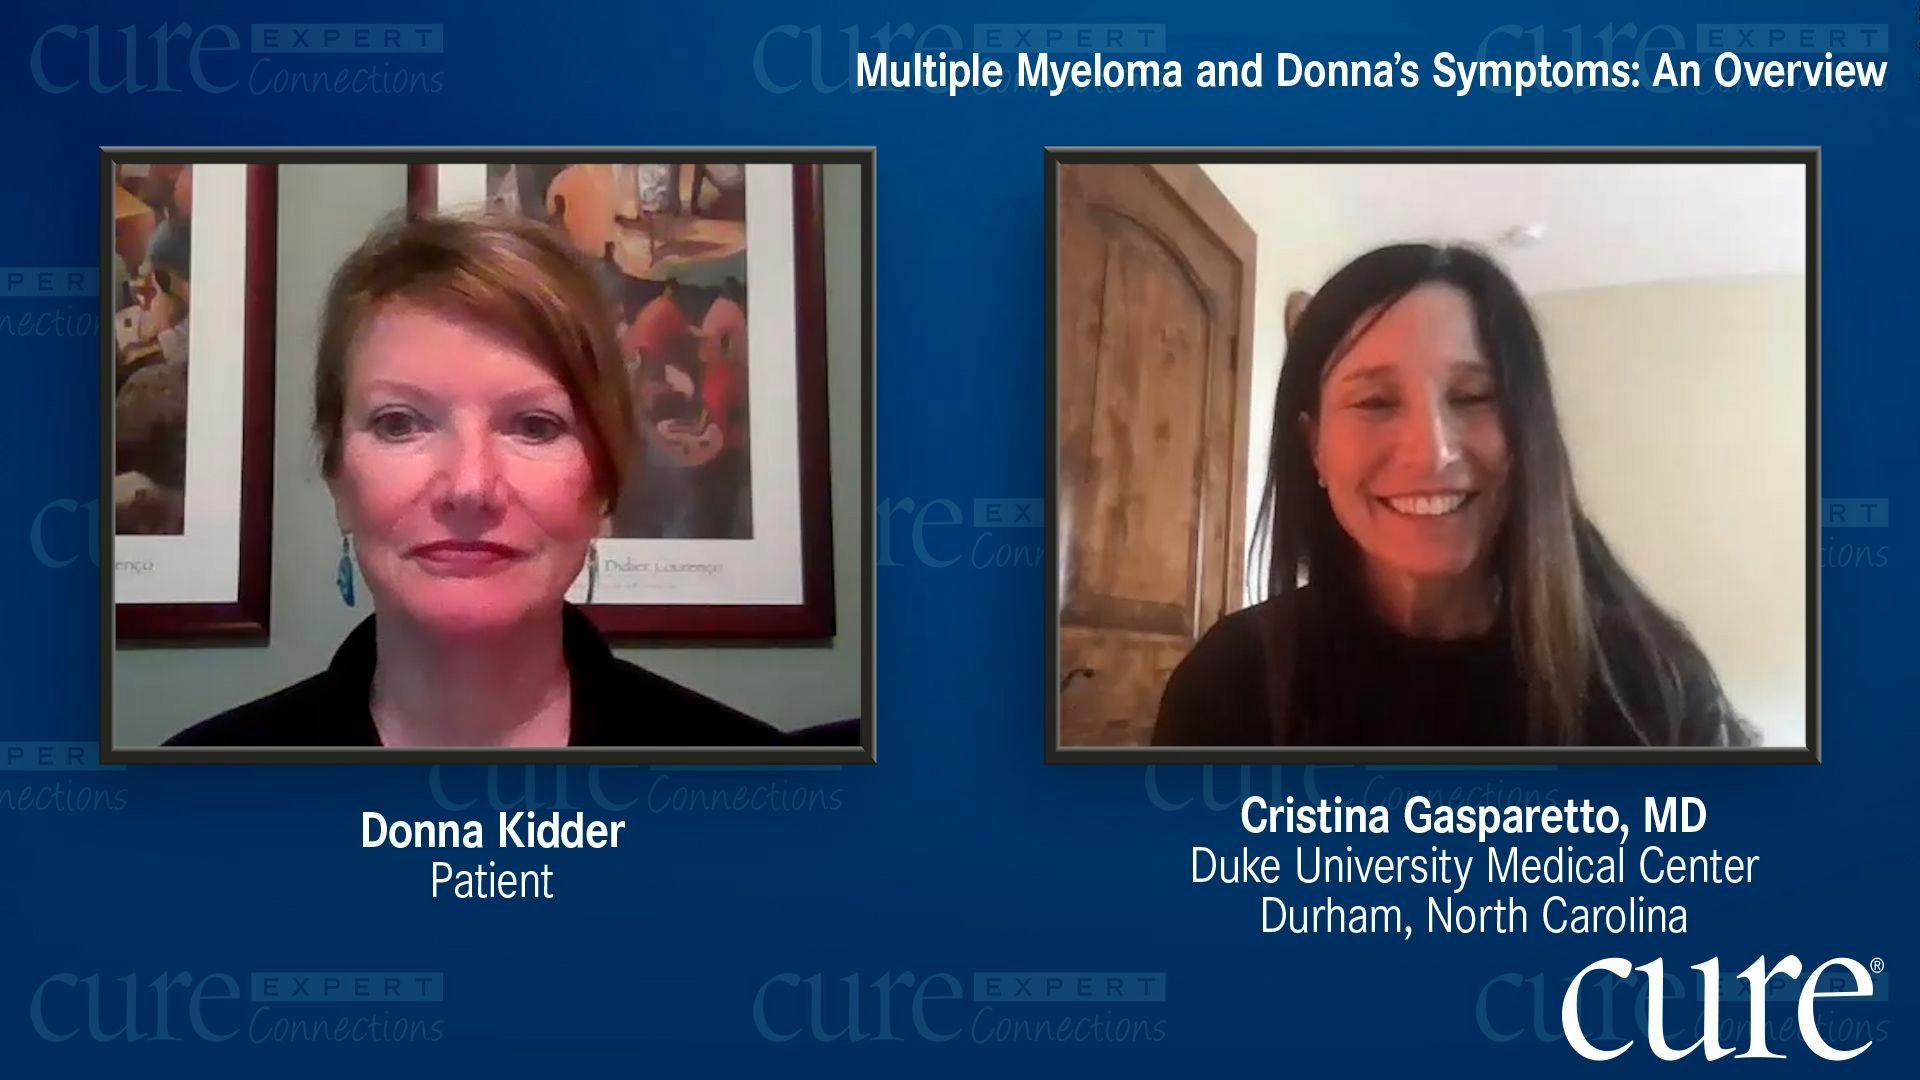 Multiple Myeloma First- and Second-Line Therapies for Donna